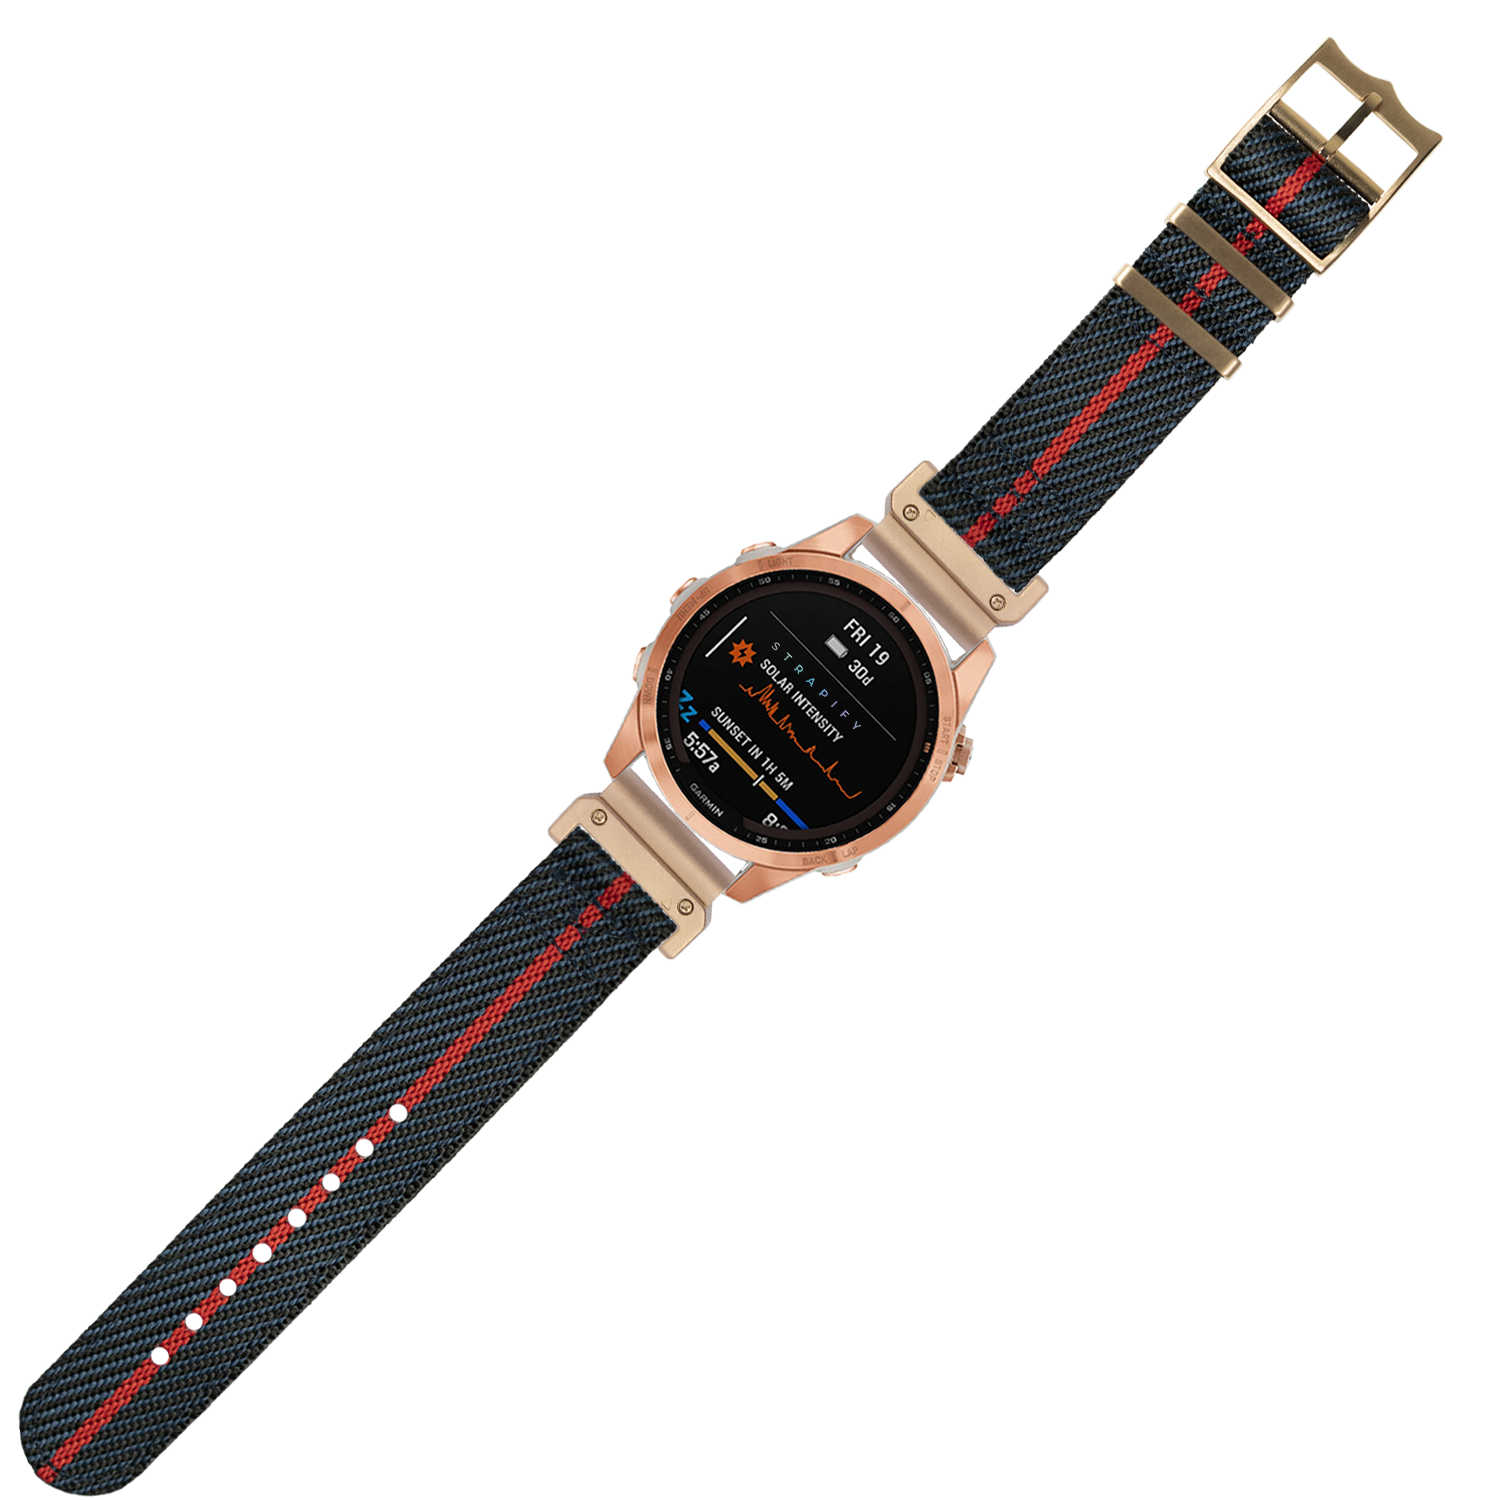 [QuickFit] Cross Militex - Night Blue / Red [Rose Gold Hardware] 26mm